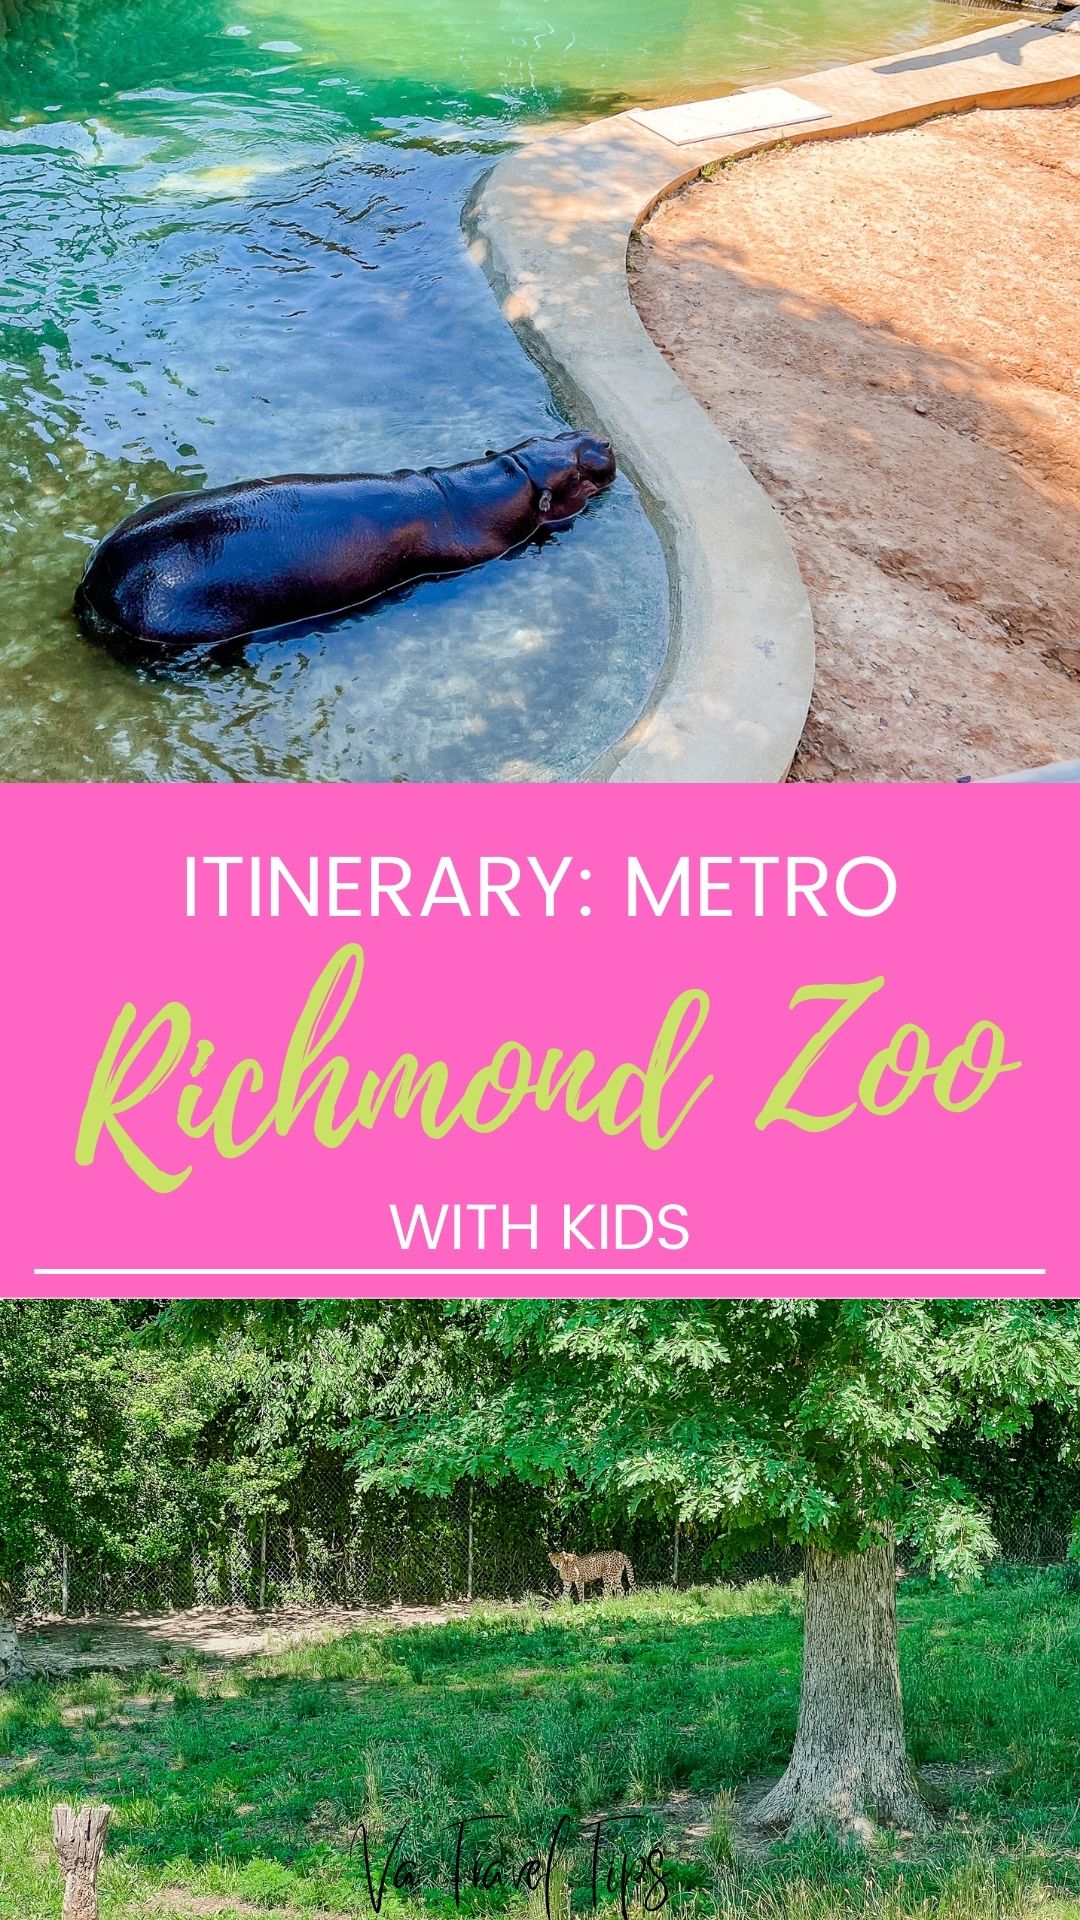 Activities at the Richmond Zoo